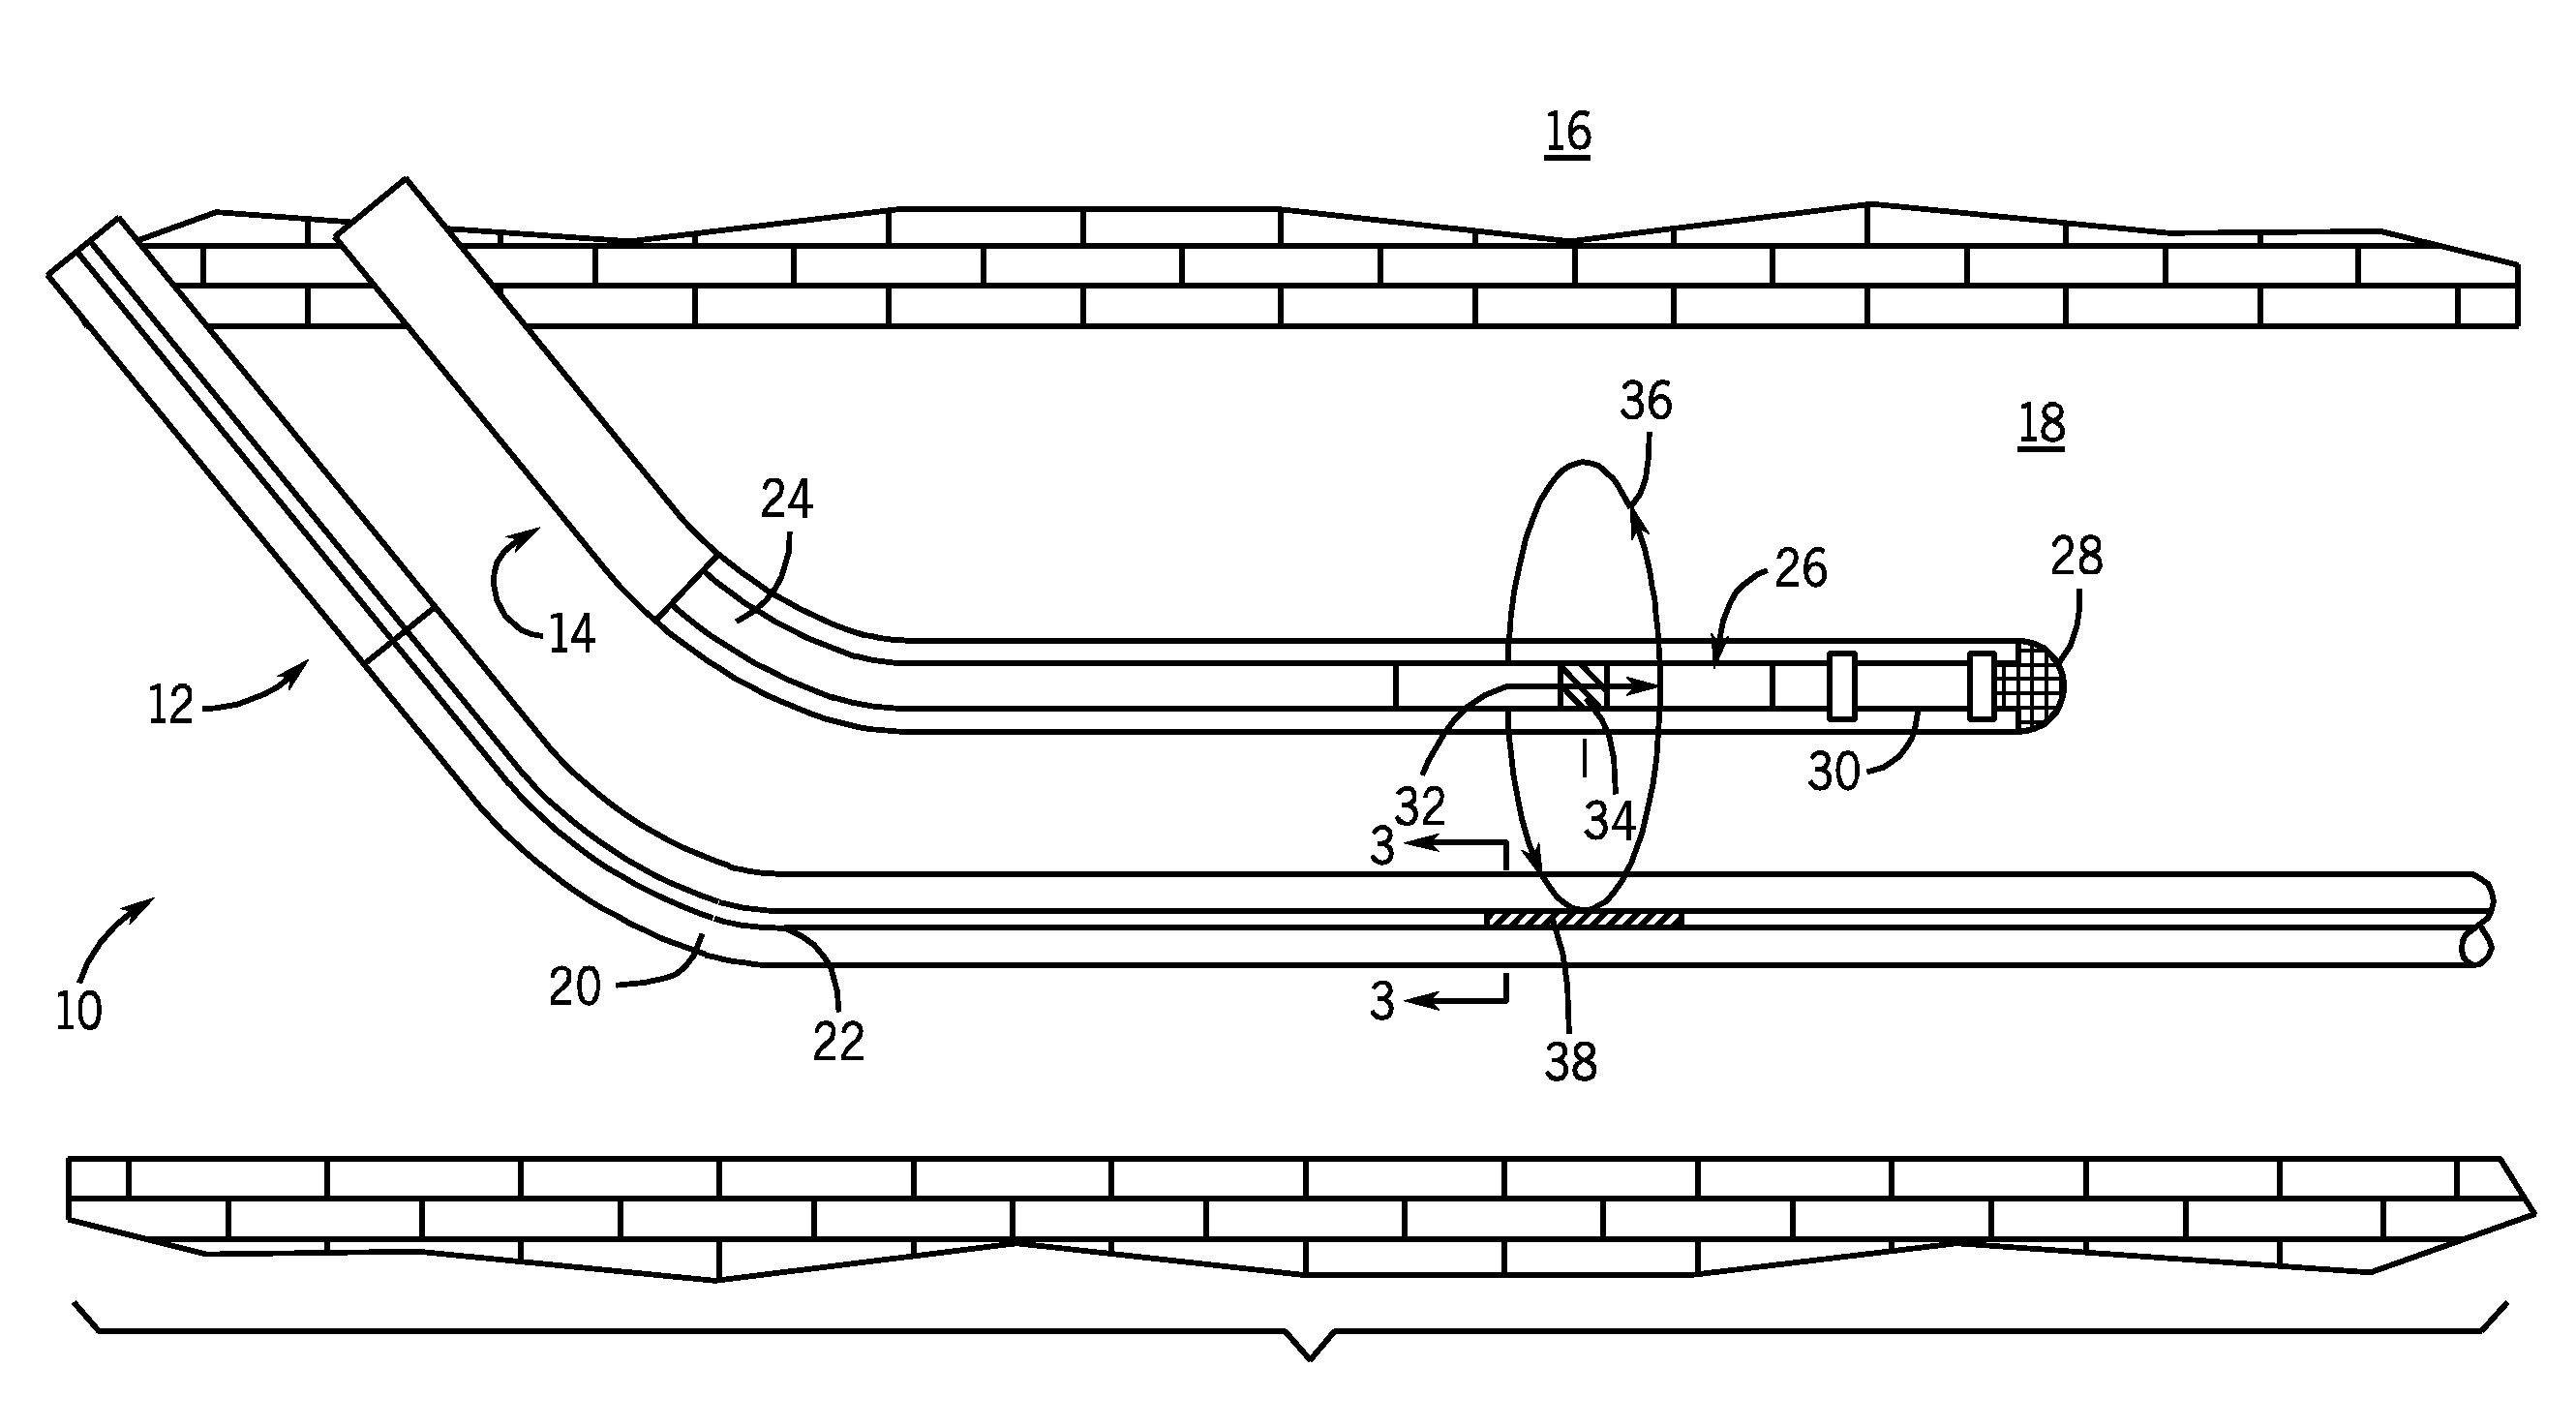 Magnetic ranging while drilling using an electric dipole source and a magnetic field sensor